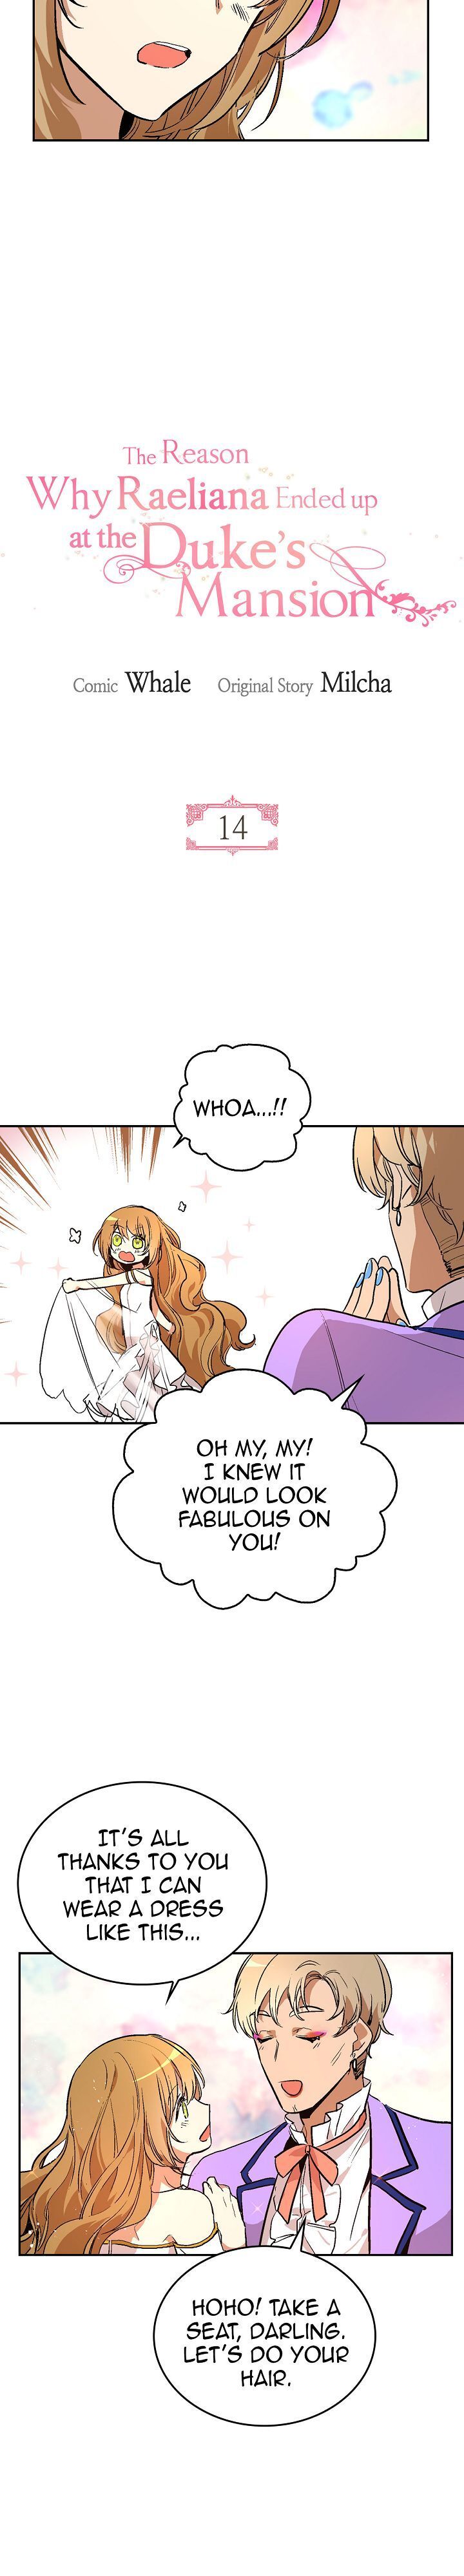 The Reason Why Raeliana Ended Up at the Duke's Mansion Chapter 014 page 3